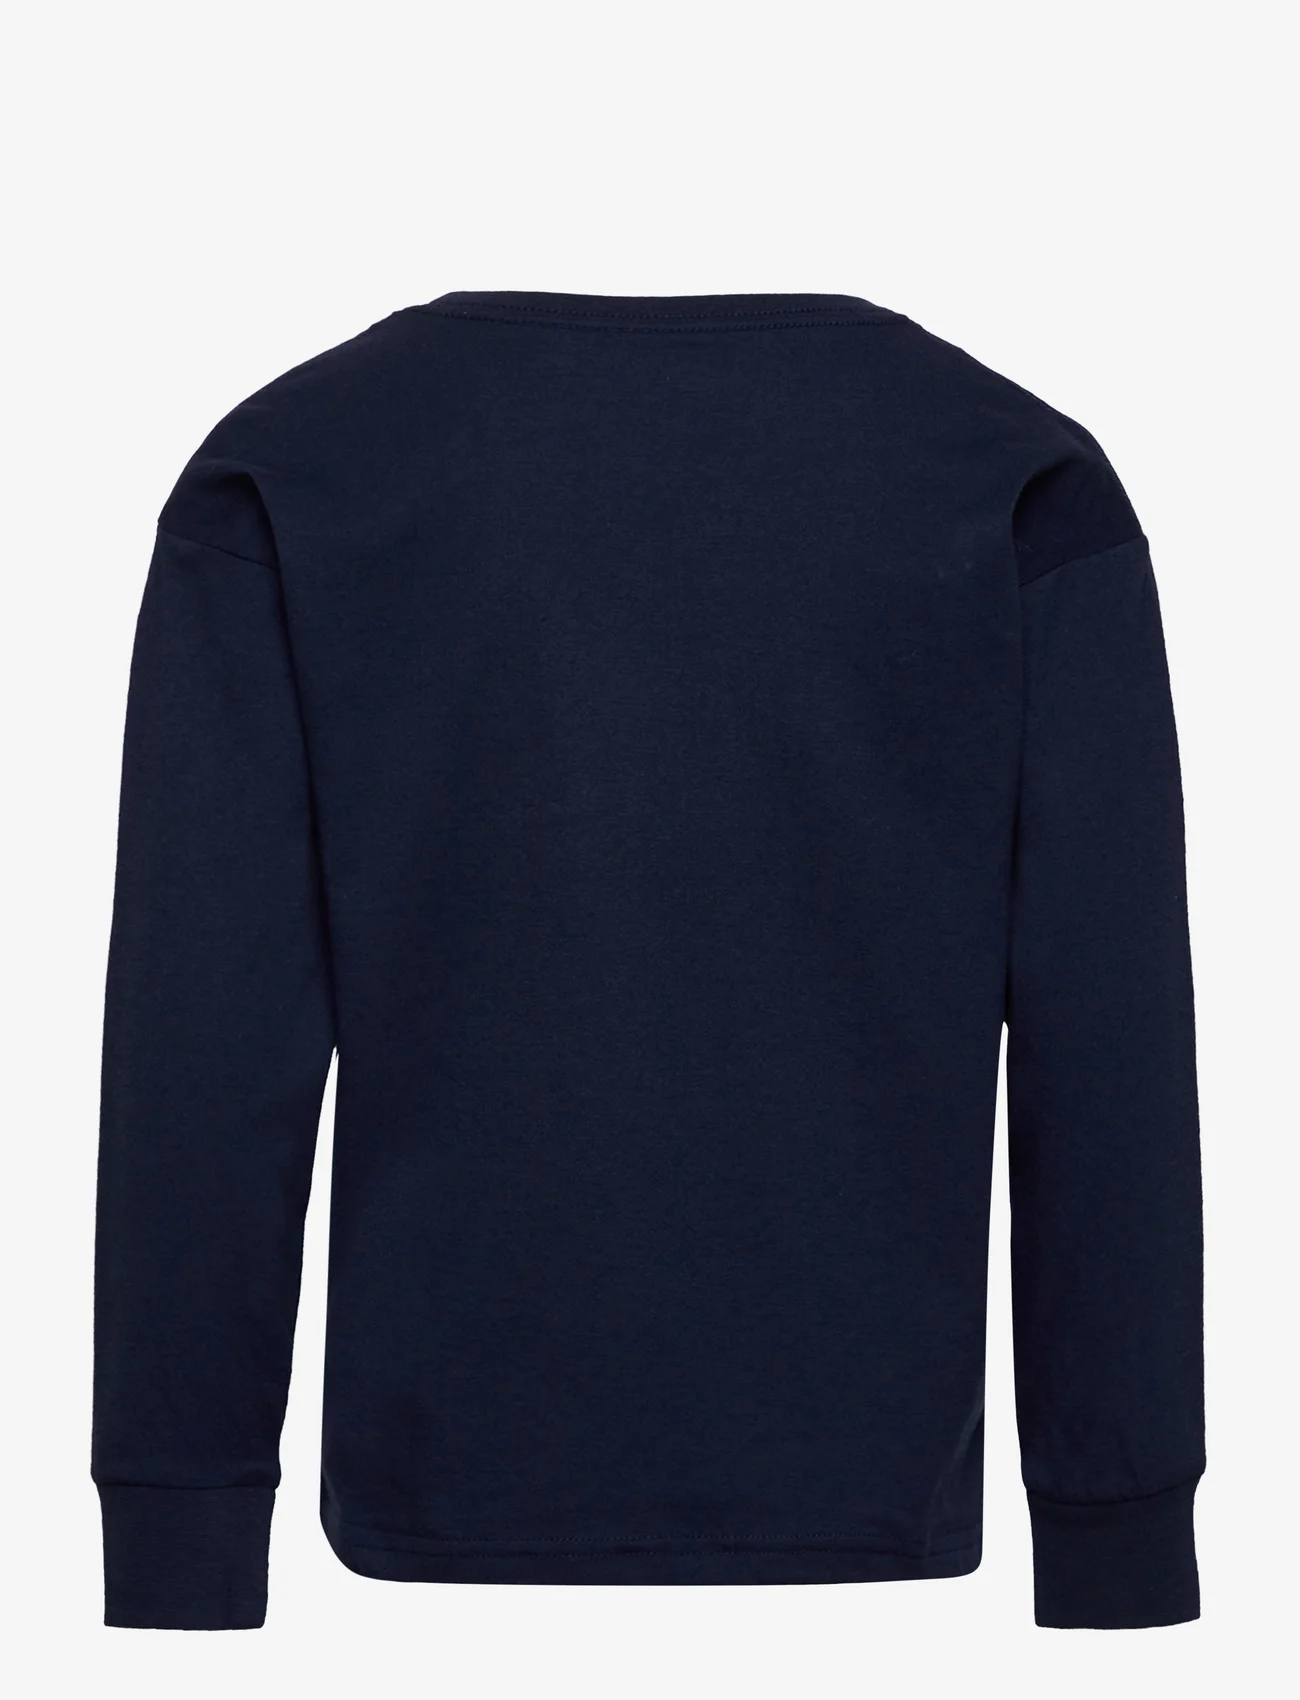 Nike - NSW RELAXED LS LBR TEE - lange mouwen - midnight navy - 1